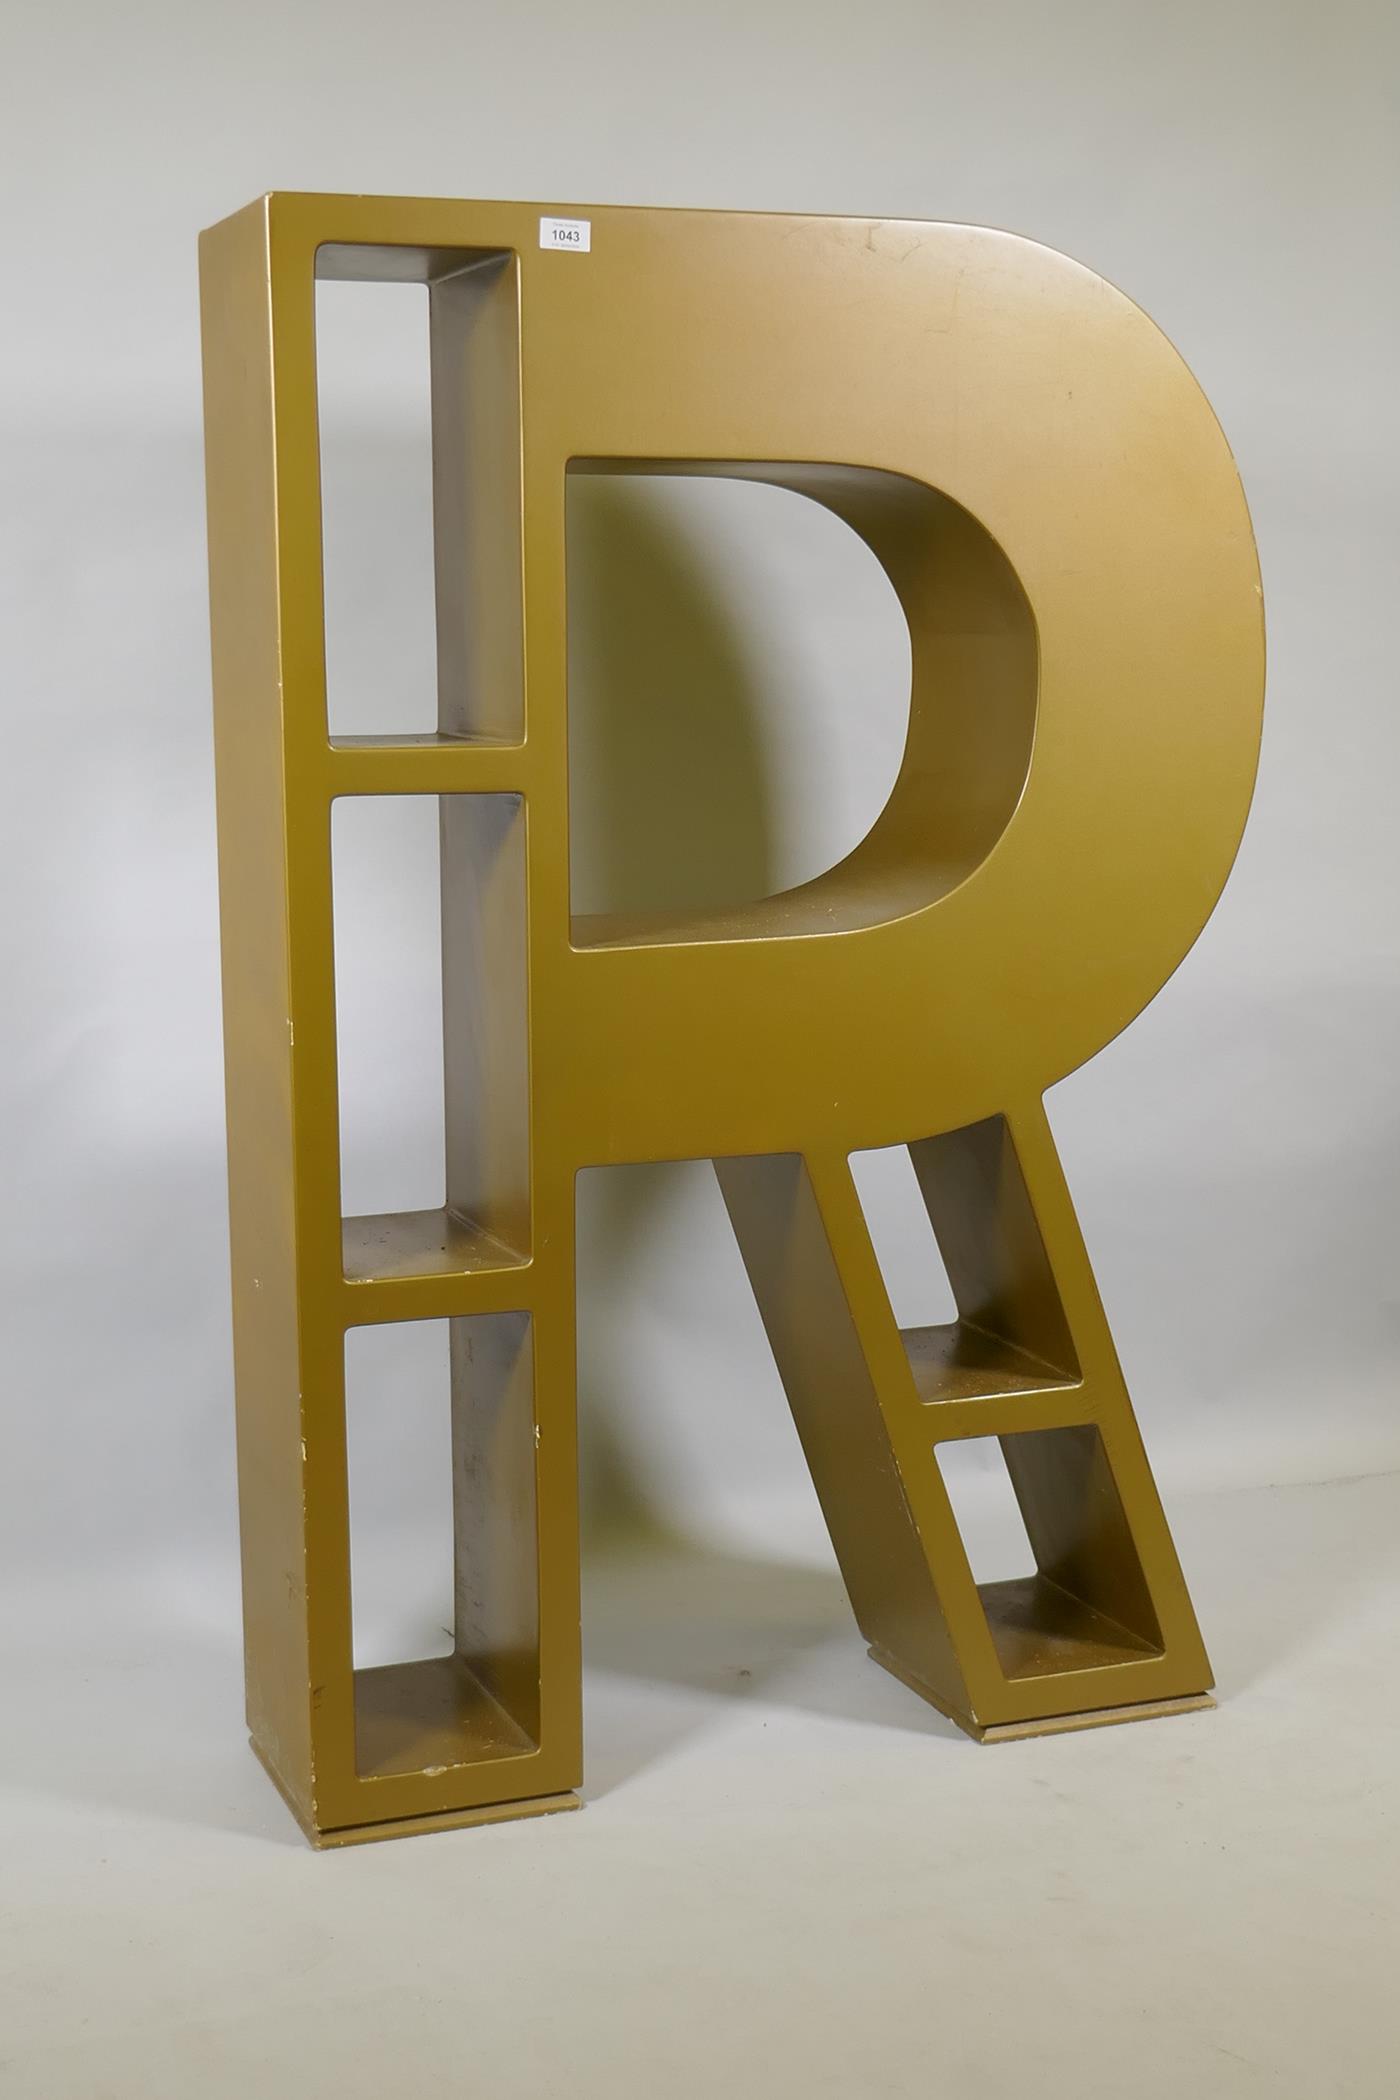 A bespoke painted wood bookcase in the shape of the letter R, 83 x 24cm, 120cm high - Image 2 of 2